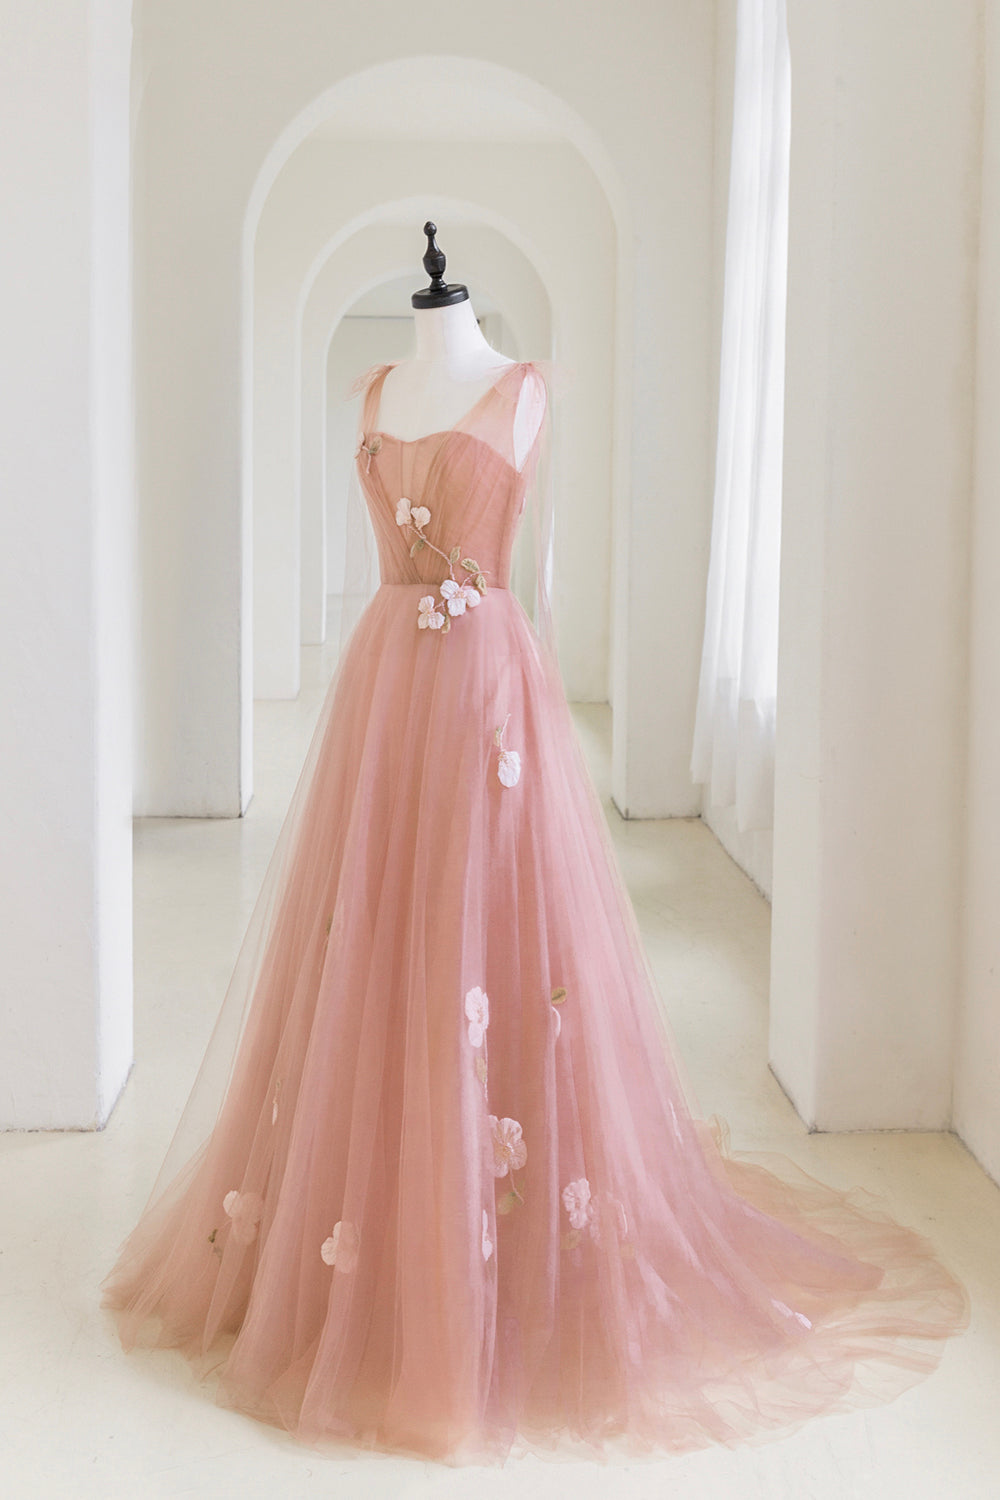 Pink Tulle Long A-Line Prom Dress Outfits For Girls, Lovely Pink Evening Graduation Dress